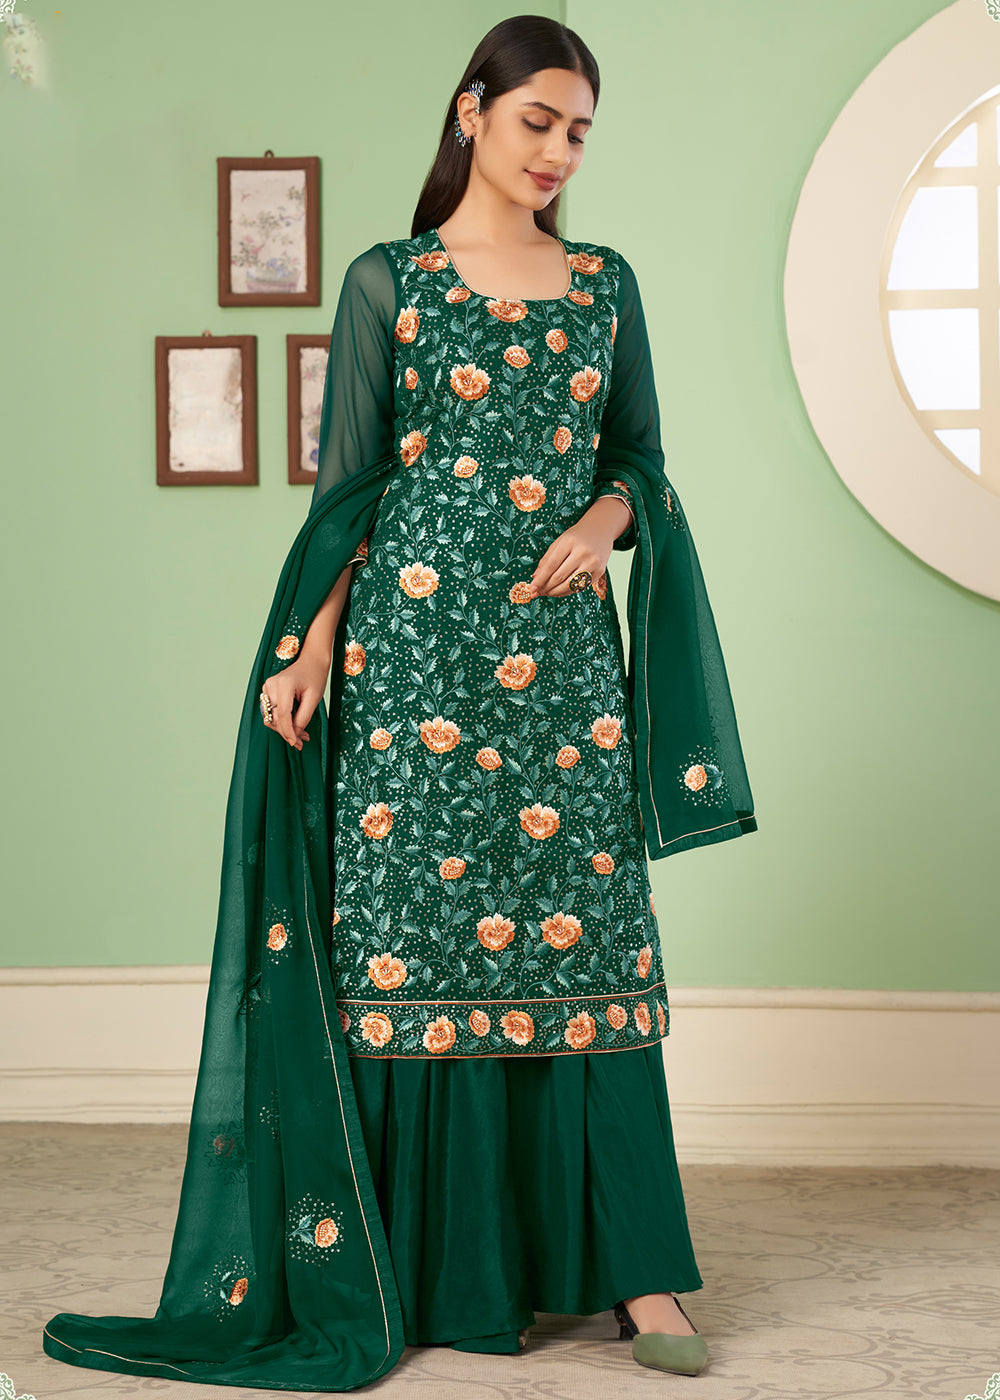 Buy Now Multi Thread Appealing Green Georgette Palazzo Salwar Suit Online in USA, UK, Canada & Worldwide at Empress Clothing. 